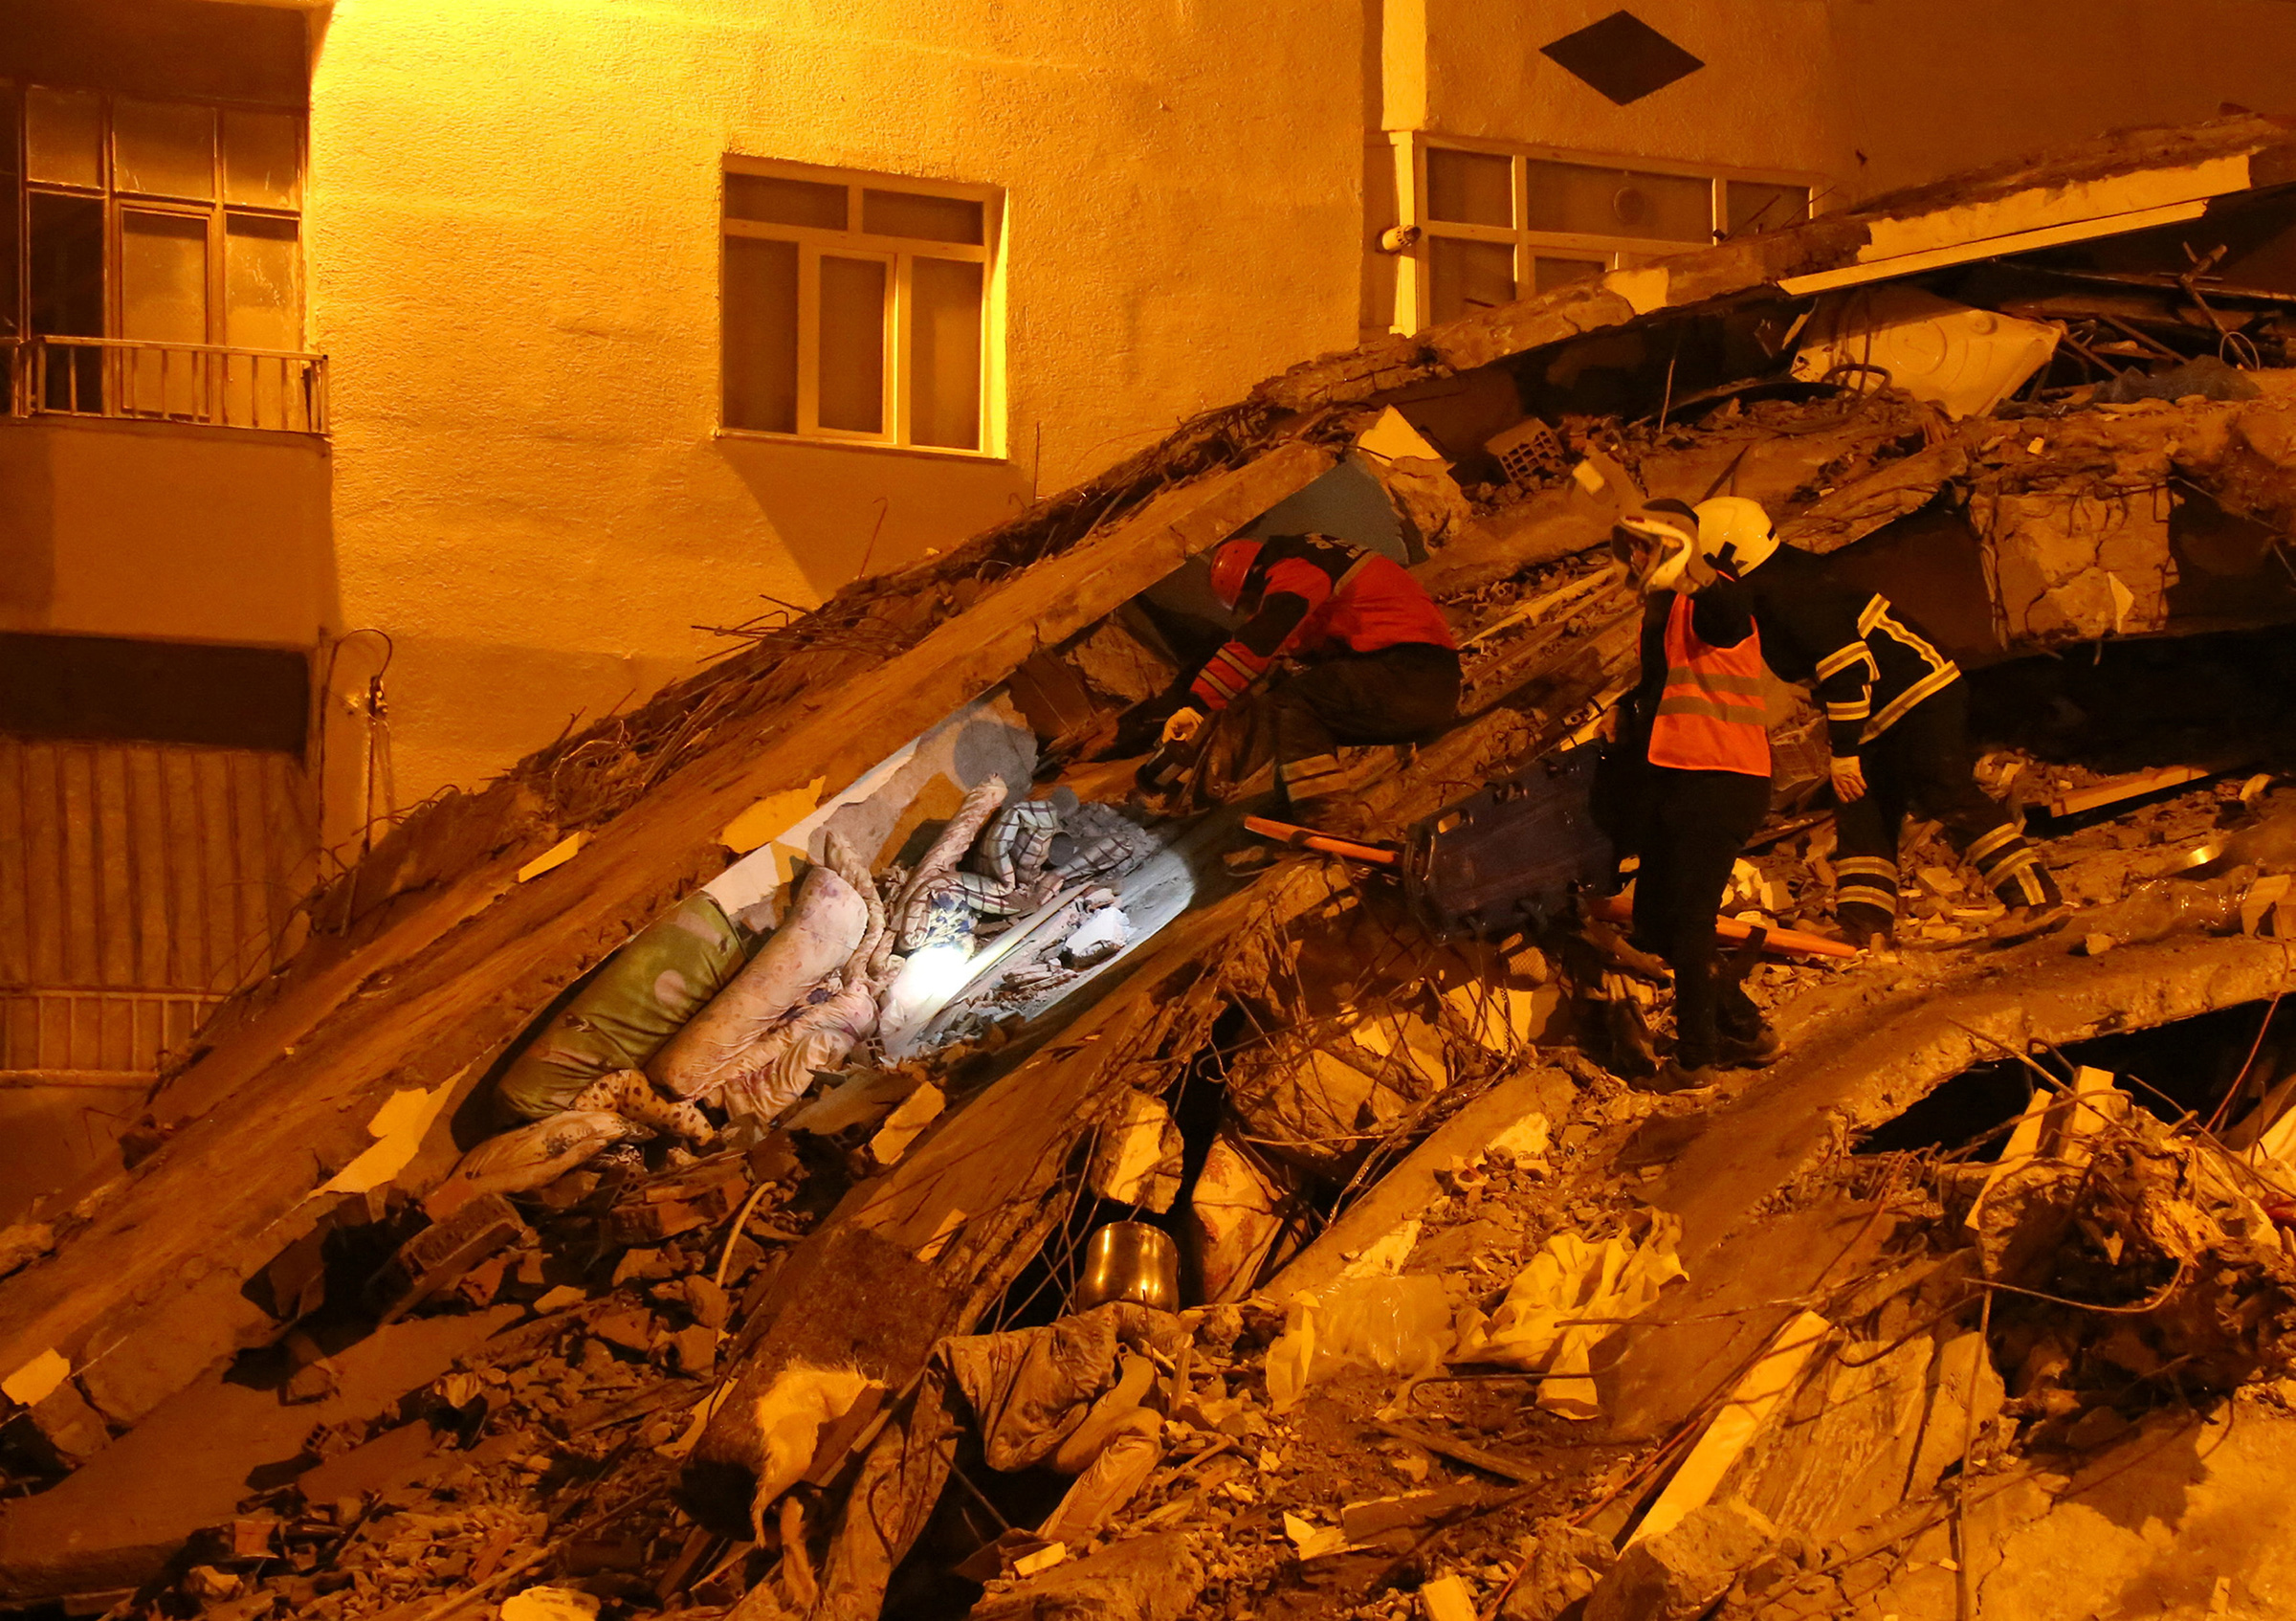 Rescuers search for survivors at the site of a collapsed building following an earthquake in Diyarbakir, Turkey, on Feb. 7. (Sertac Kayar—Reuters)